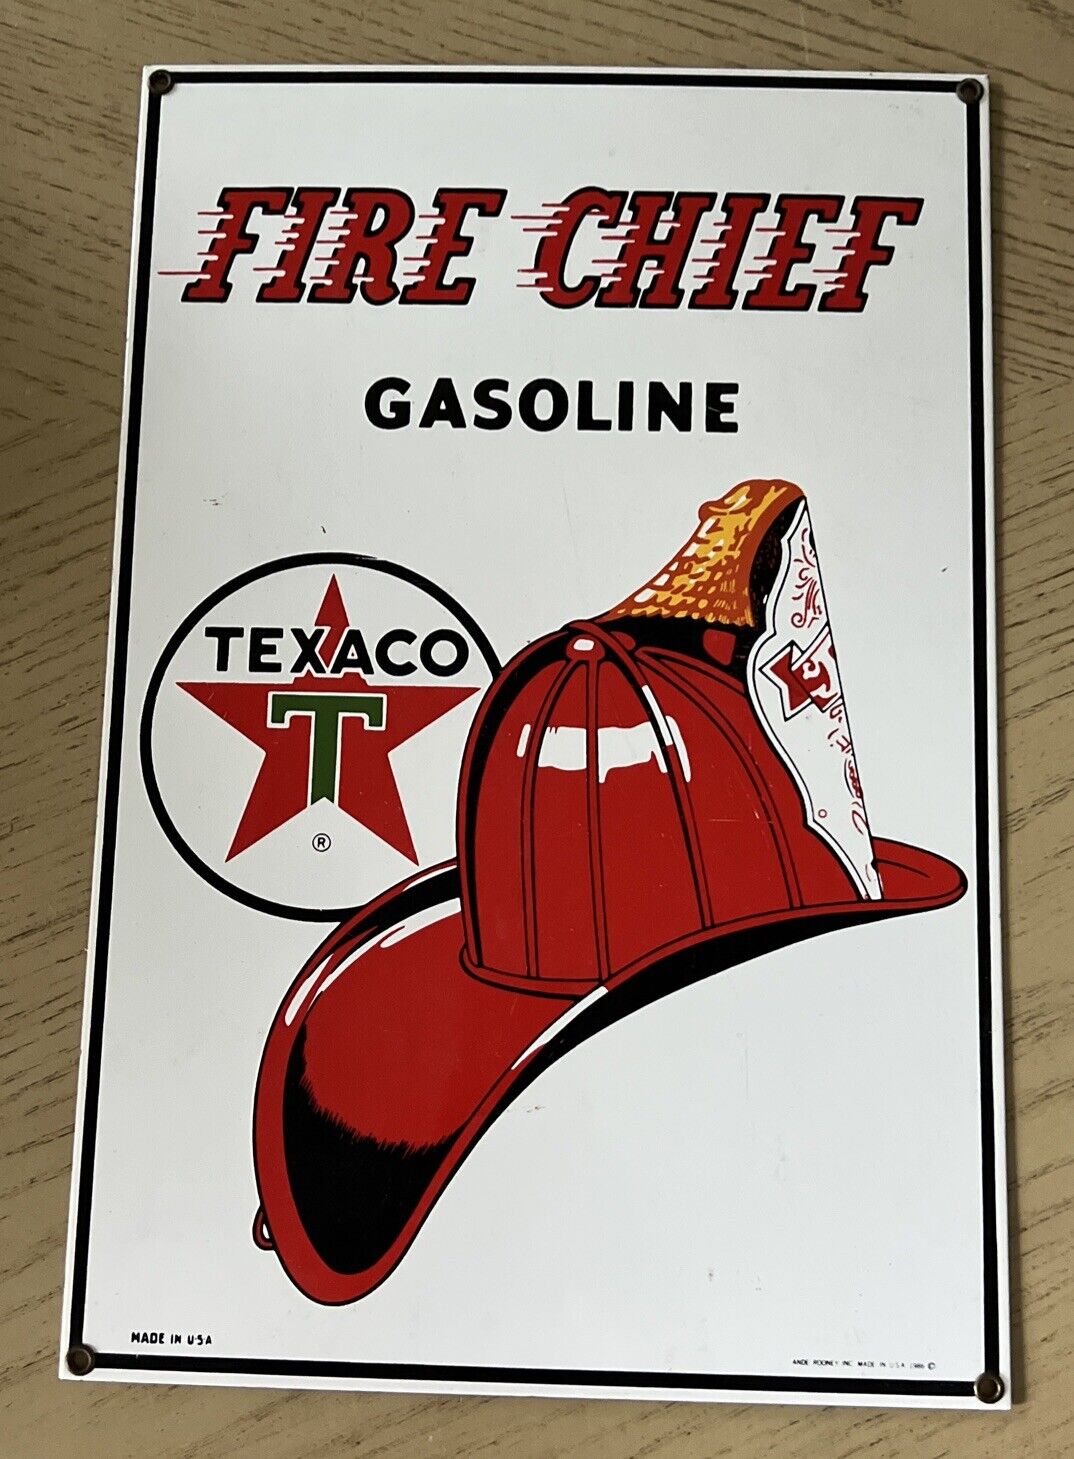 FIRE CHIEF GASOLINE TEXACO 1986 Ande Rooney Porcelain Advertising Sign - Vintage